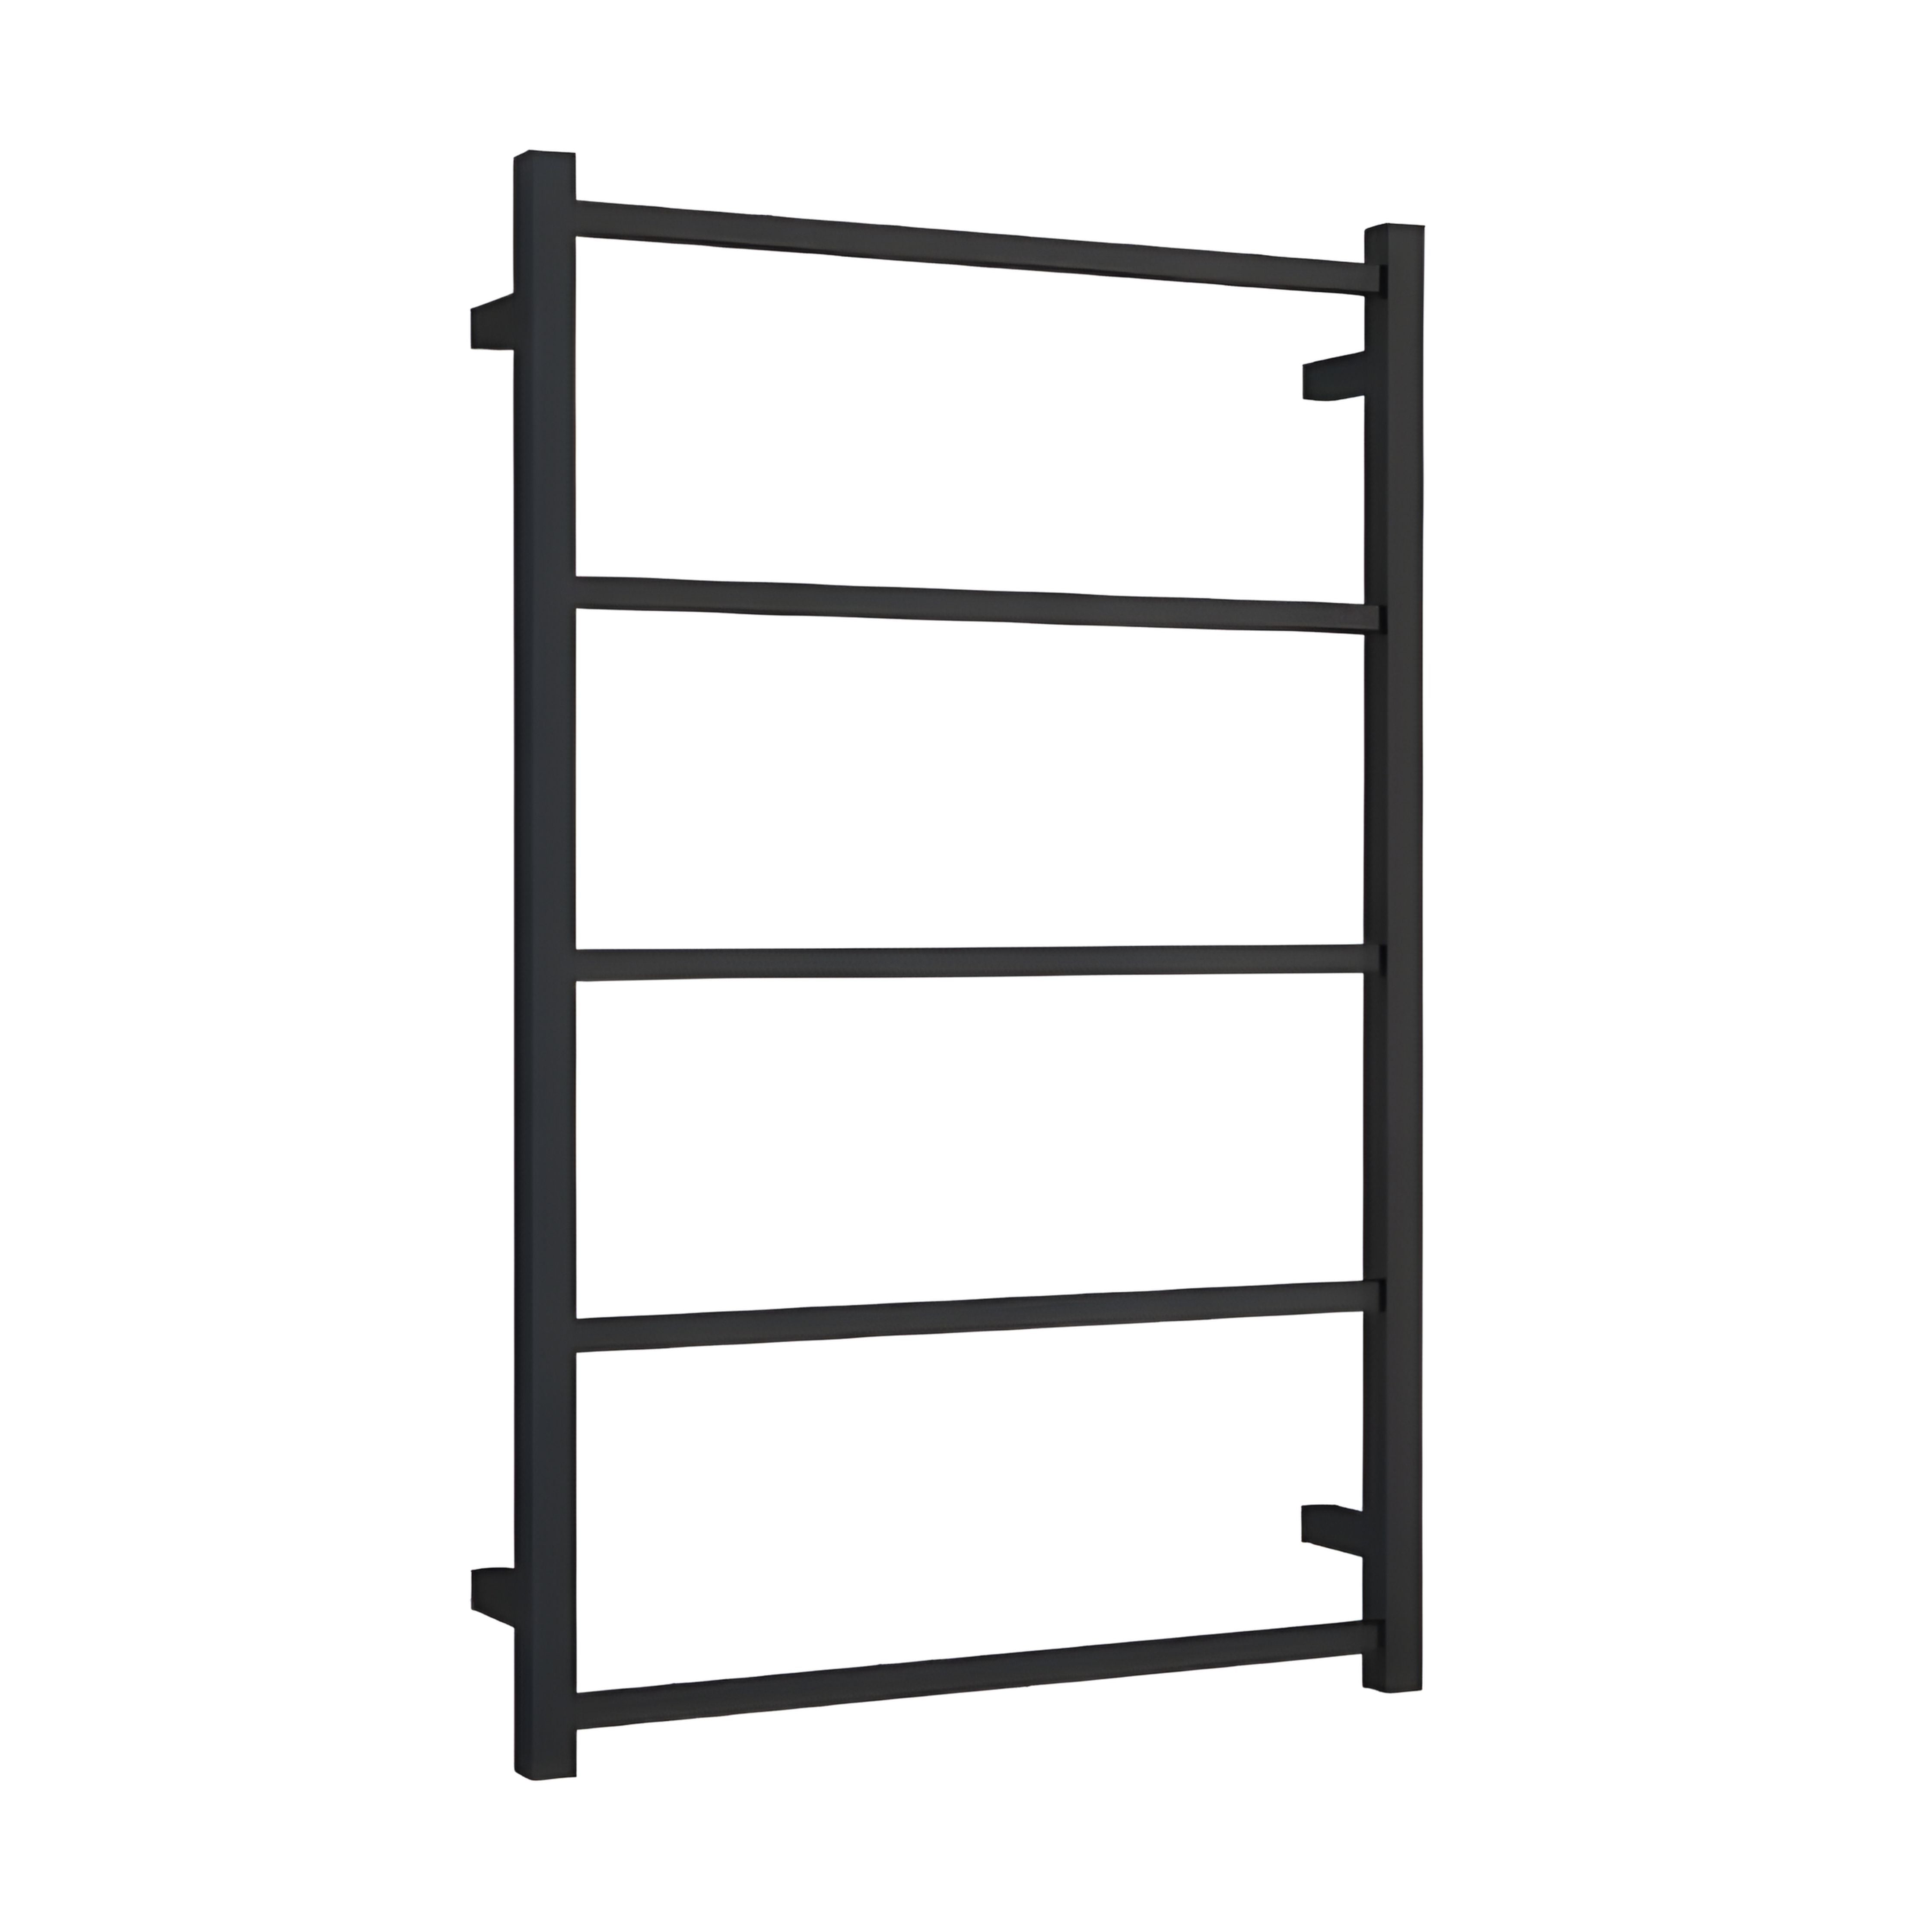 THERMOGROUP SQUARE NON-HEATED LADDER TOWEL RAIL MATTE BLACK 650MM